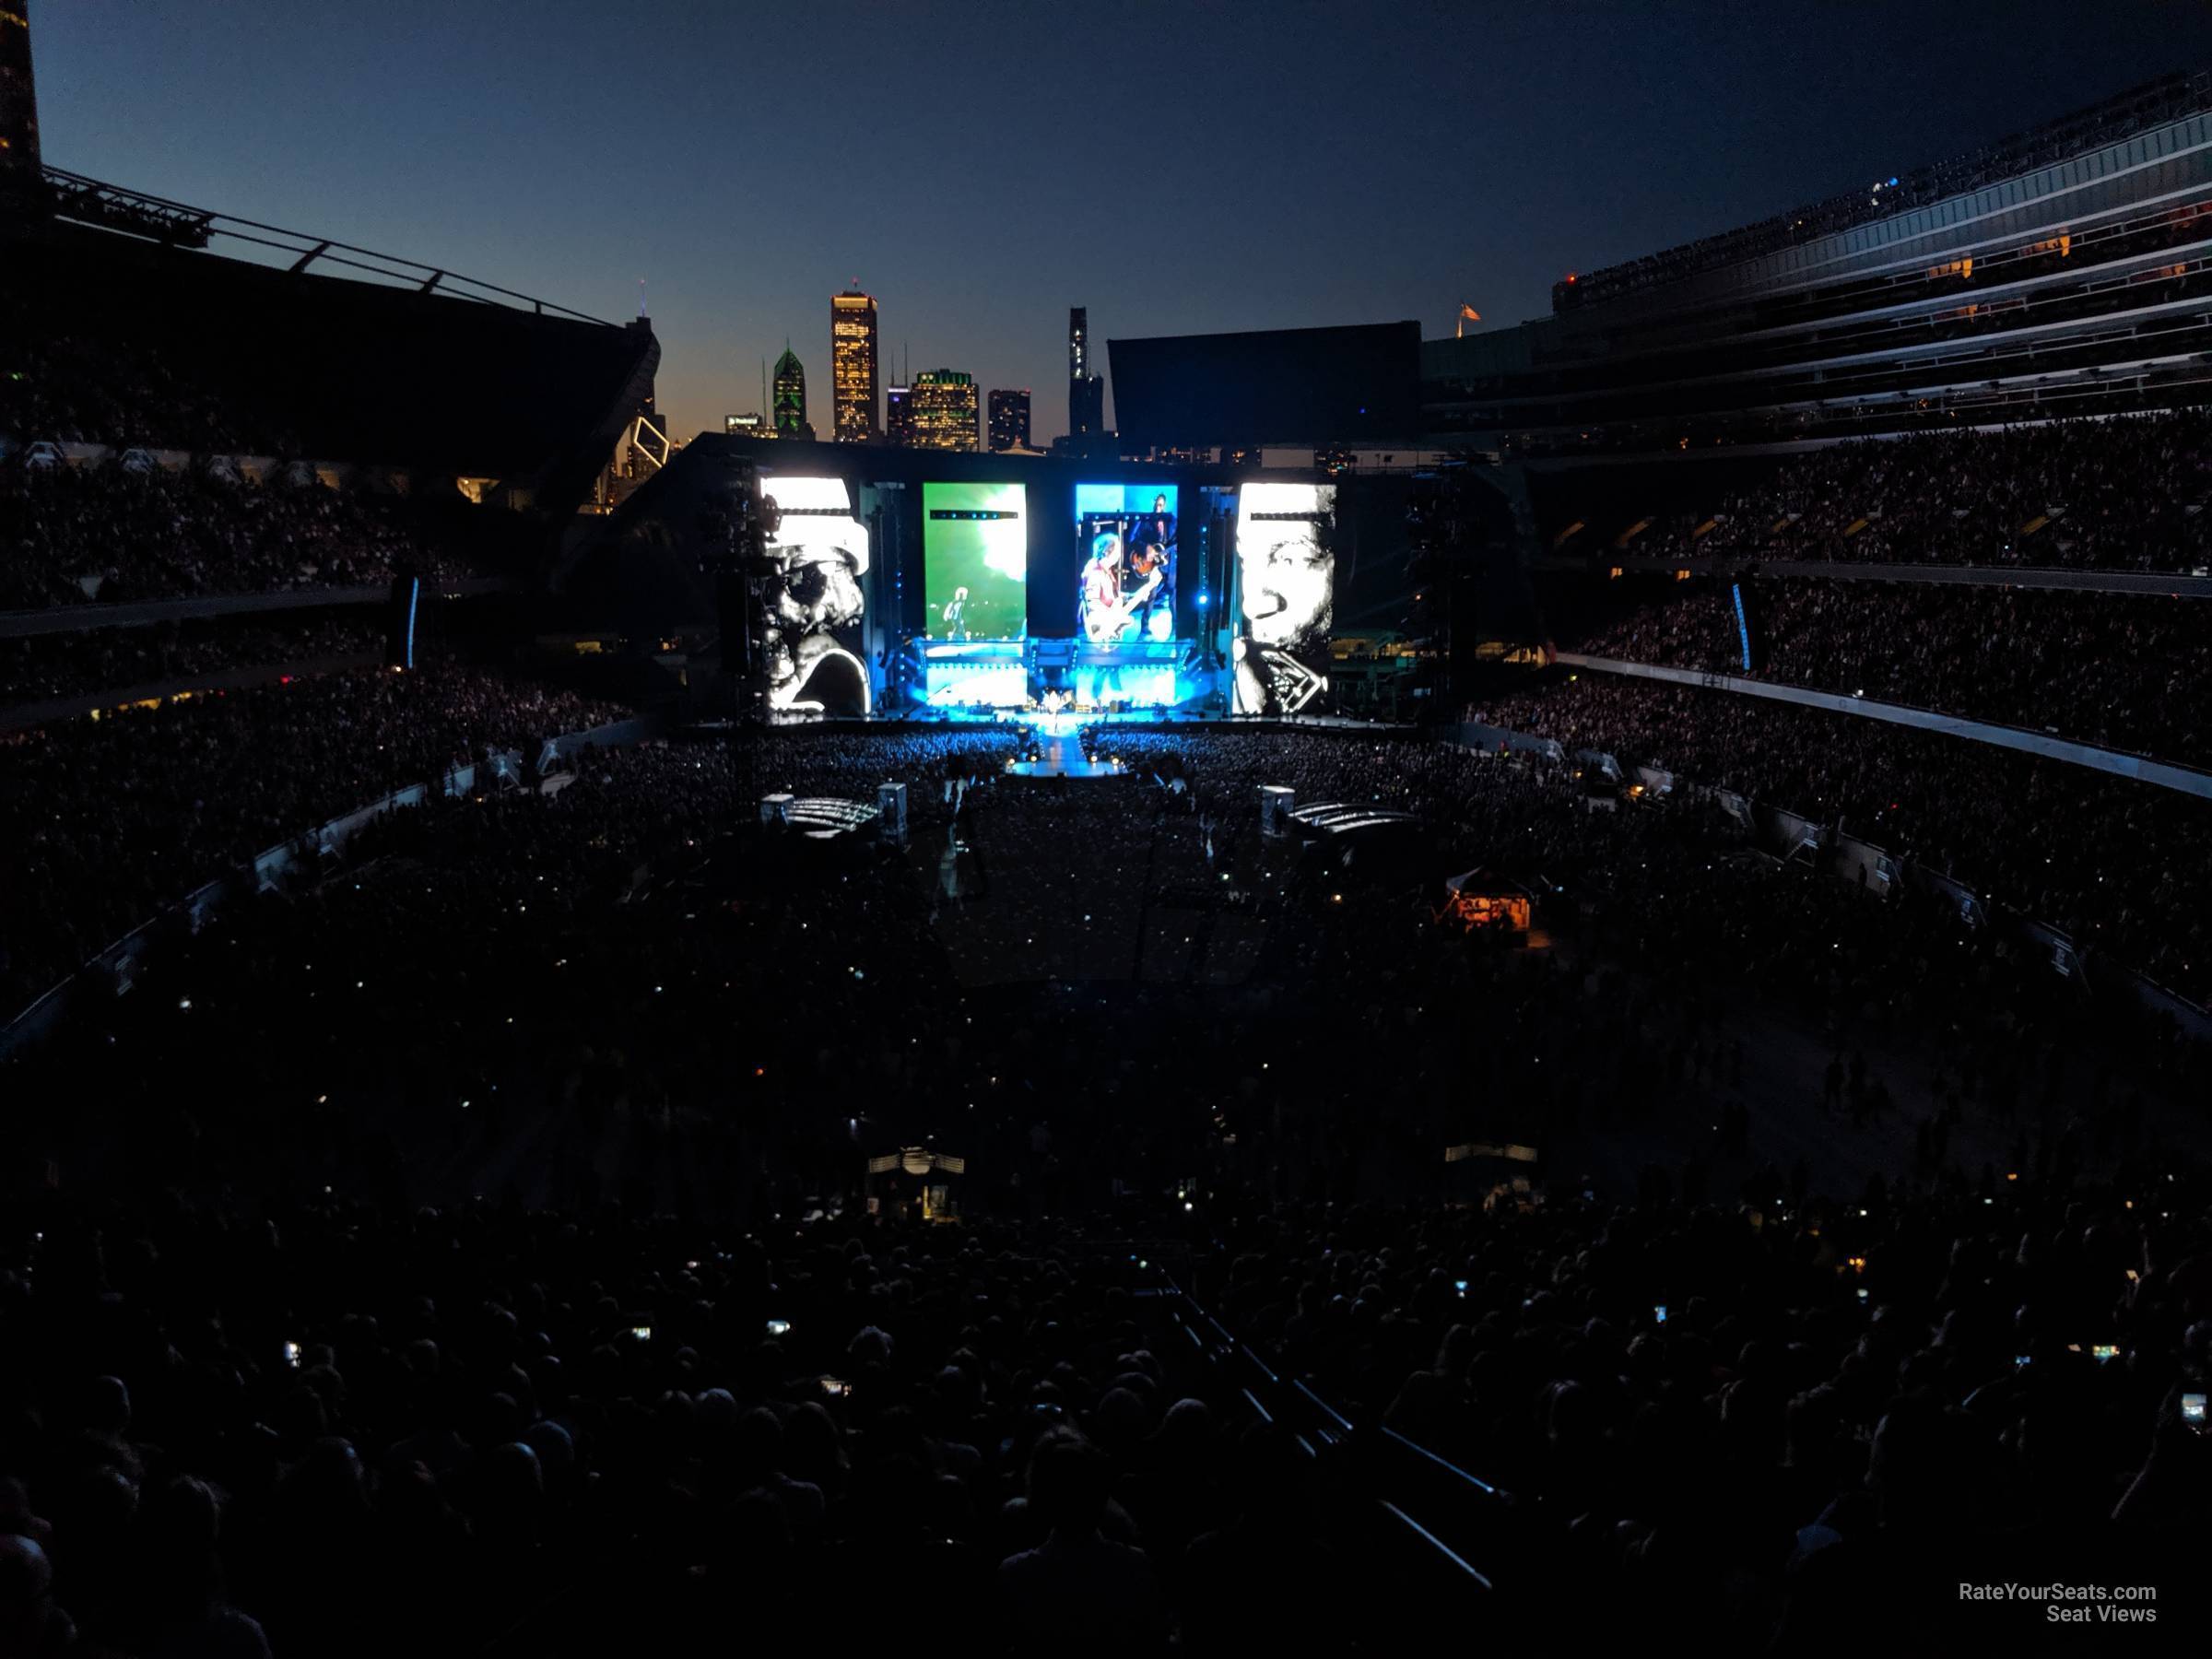 section 323, row 8 seat view  for concert - soldier field